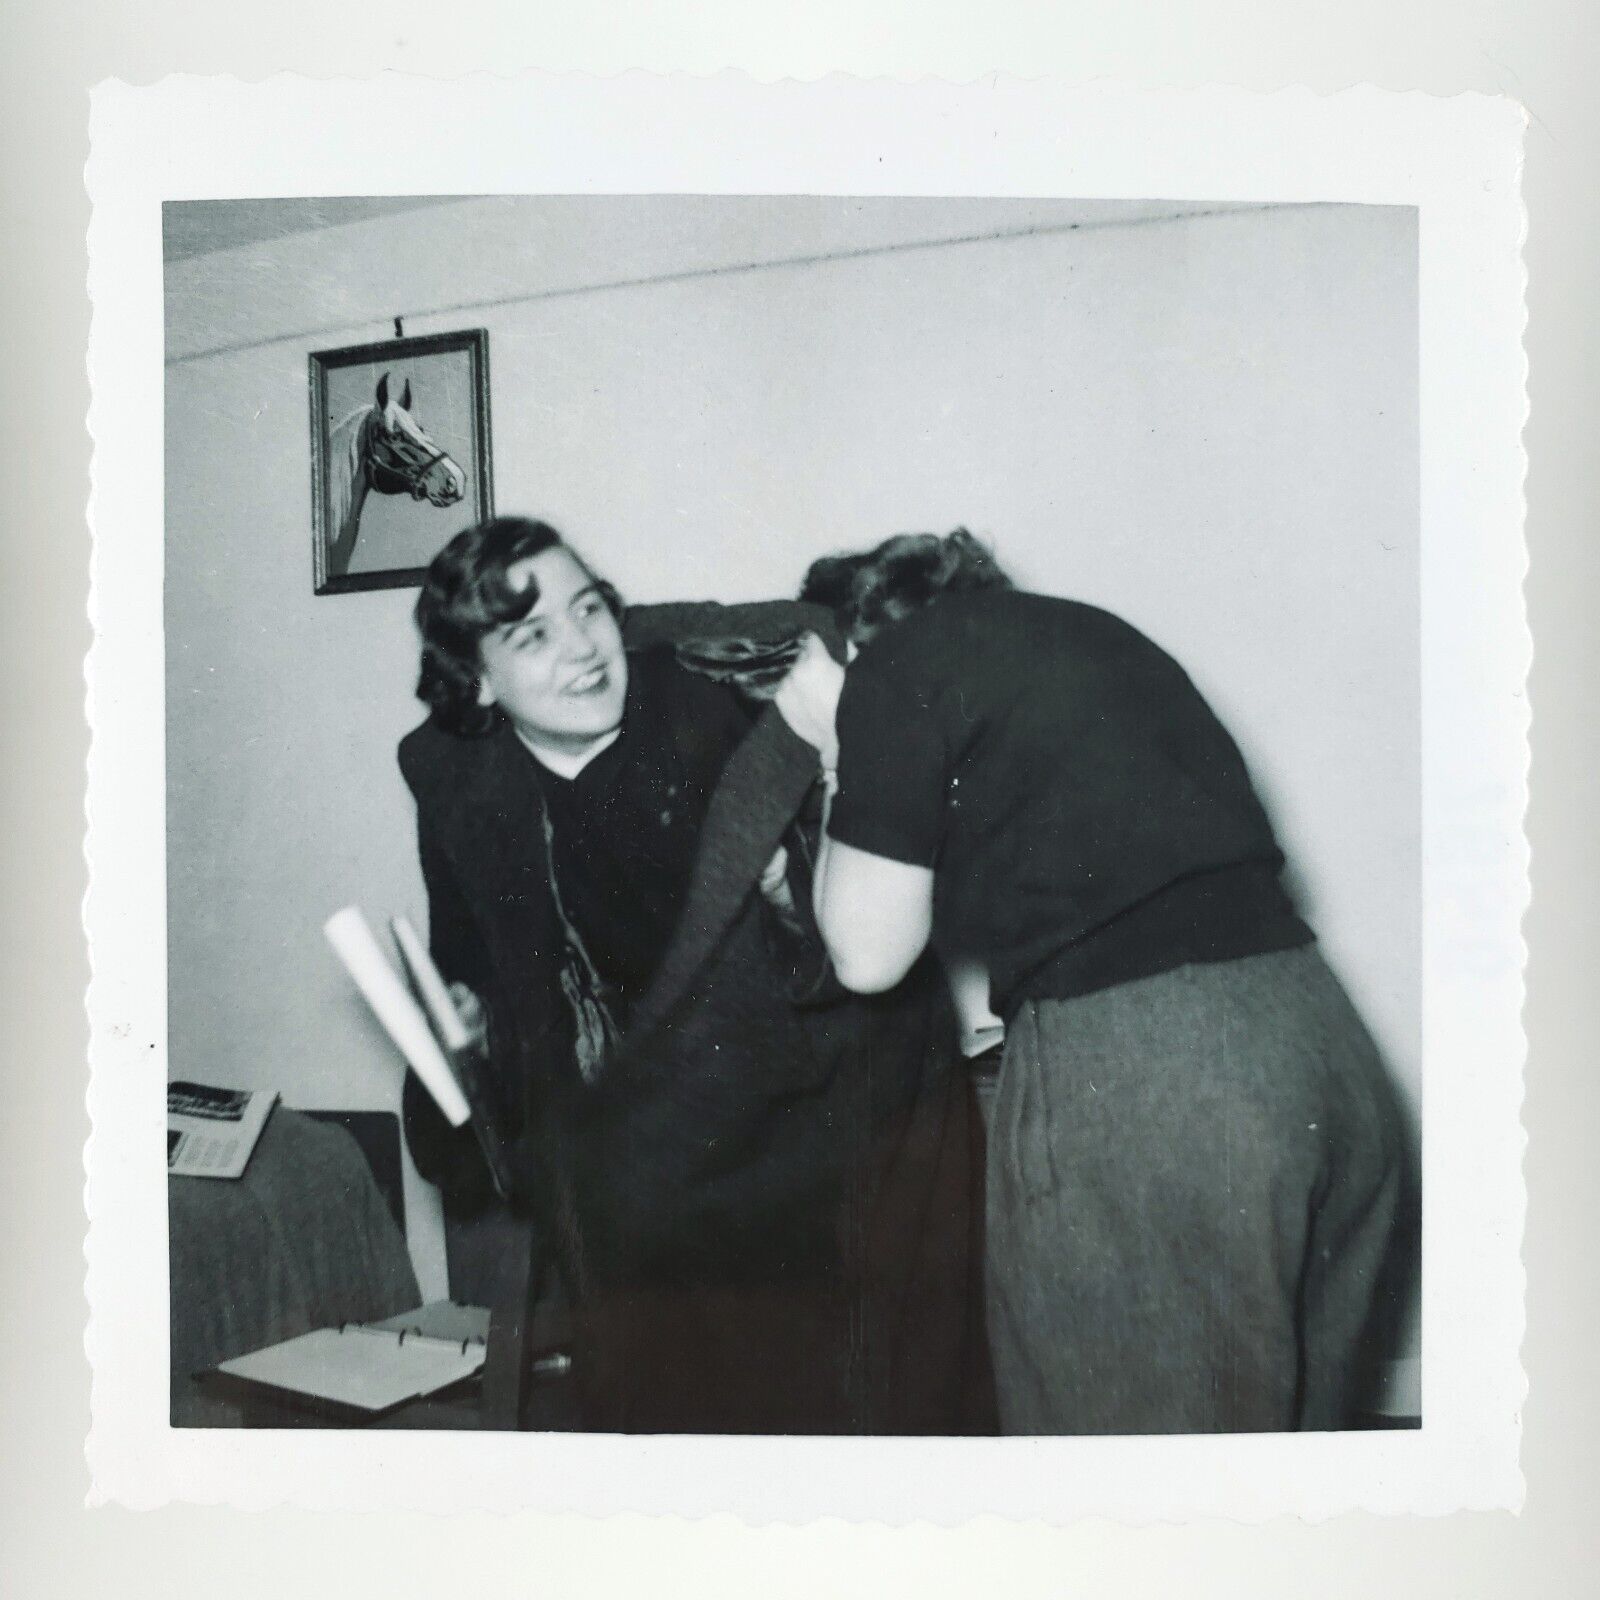 Shy Girl Hiding from Camera Photo 1950s Laughing Women Candid Snapshot A4332